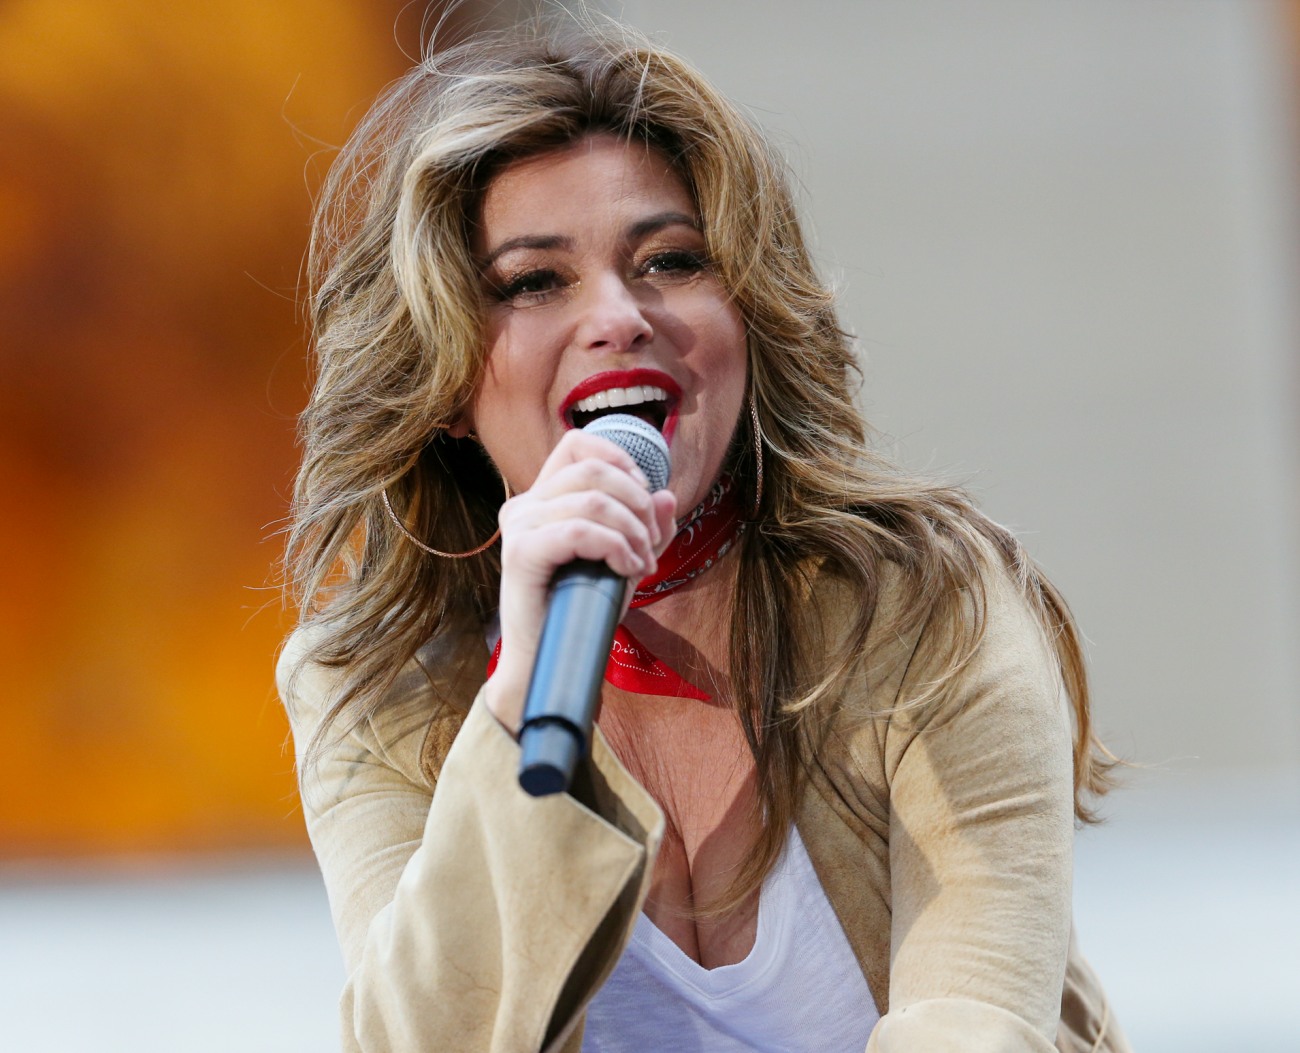 Shania Twain performing on the Today Show